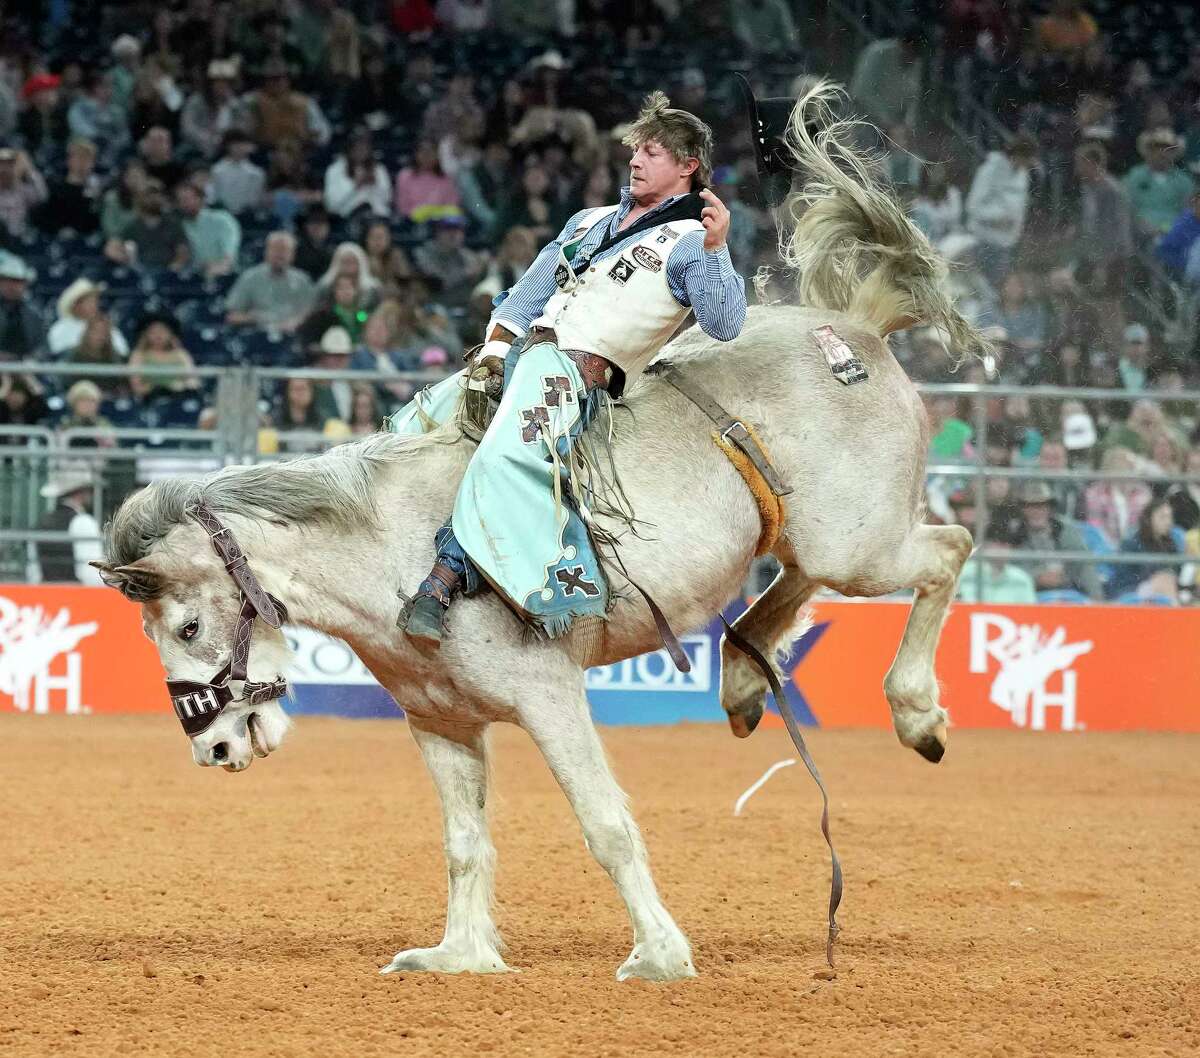 Keenan Hayes rides Girl Crush in the bareback riding competition during Wildcard 1 of Rodeo Houston at the Houston Livestock Show and Rodeo at NRG Stadium on Friday, March 17, 2023 in Houston.